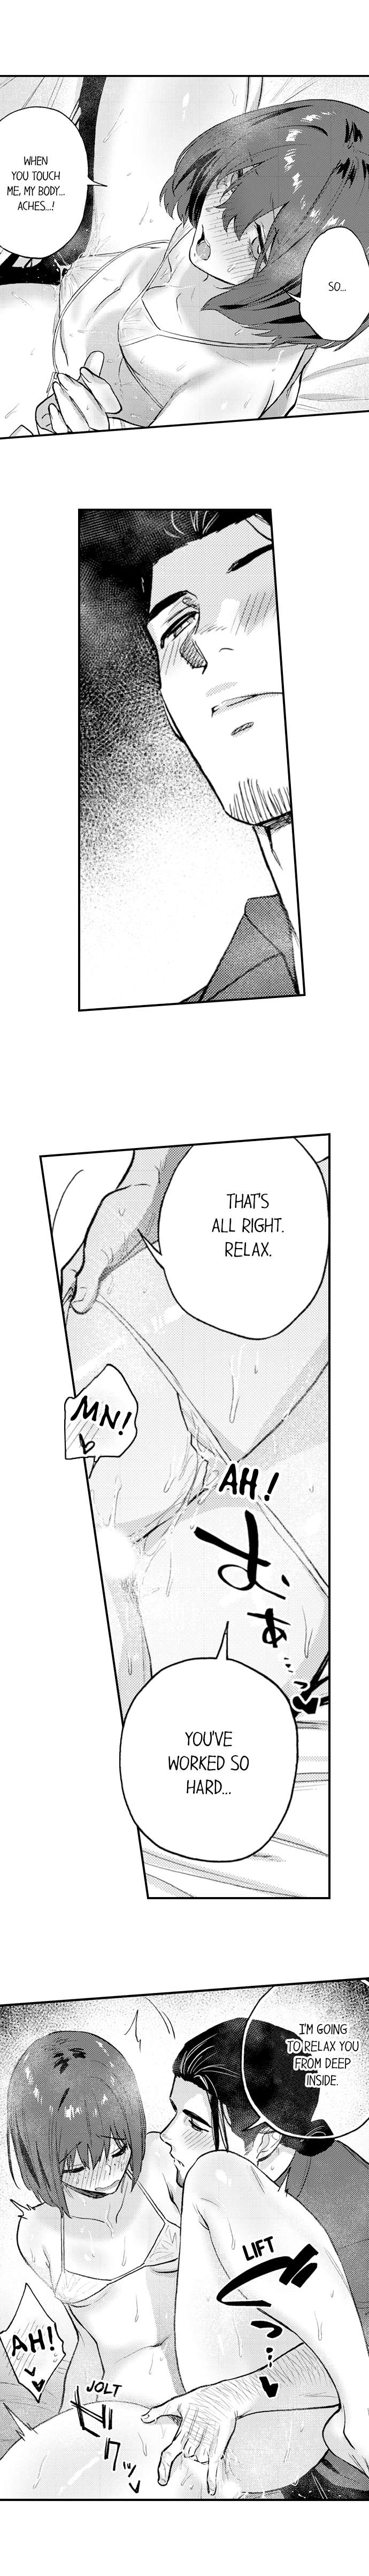 The Massage ♂♀ The Pleasure of Full Course Sex - Chapter 1 Page 7